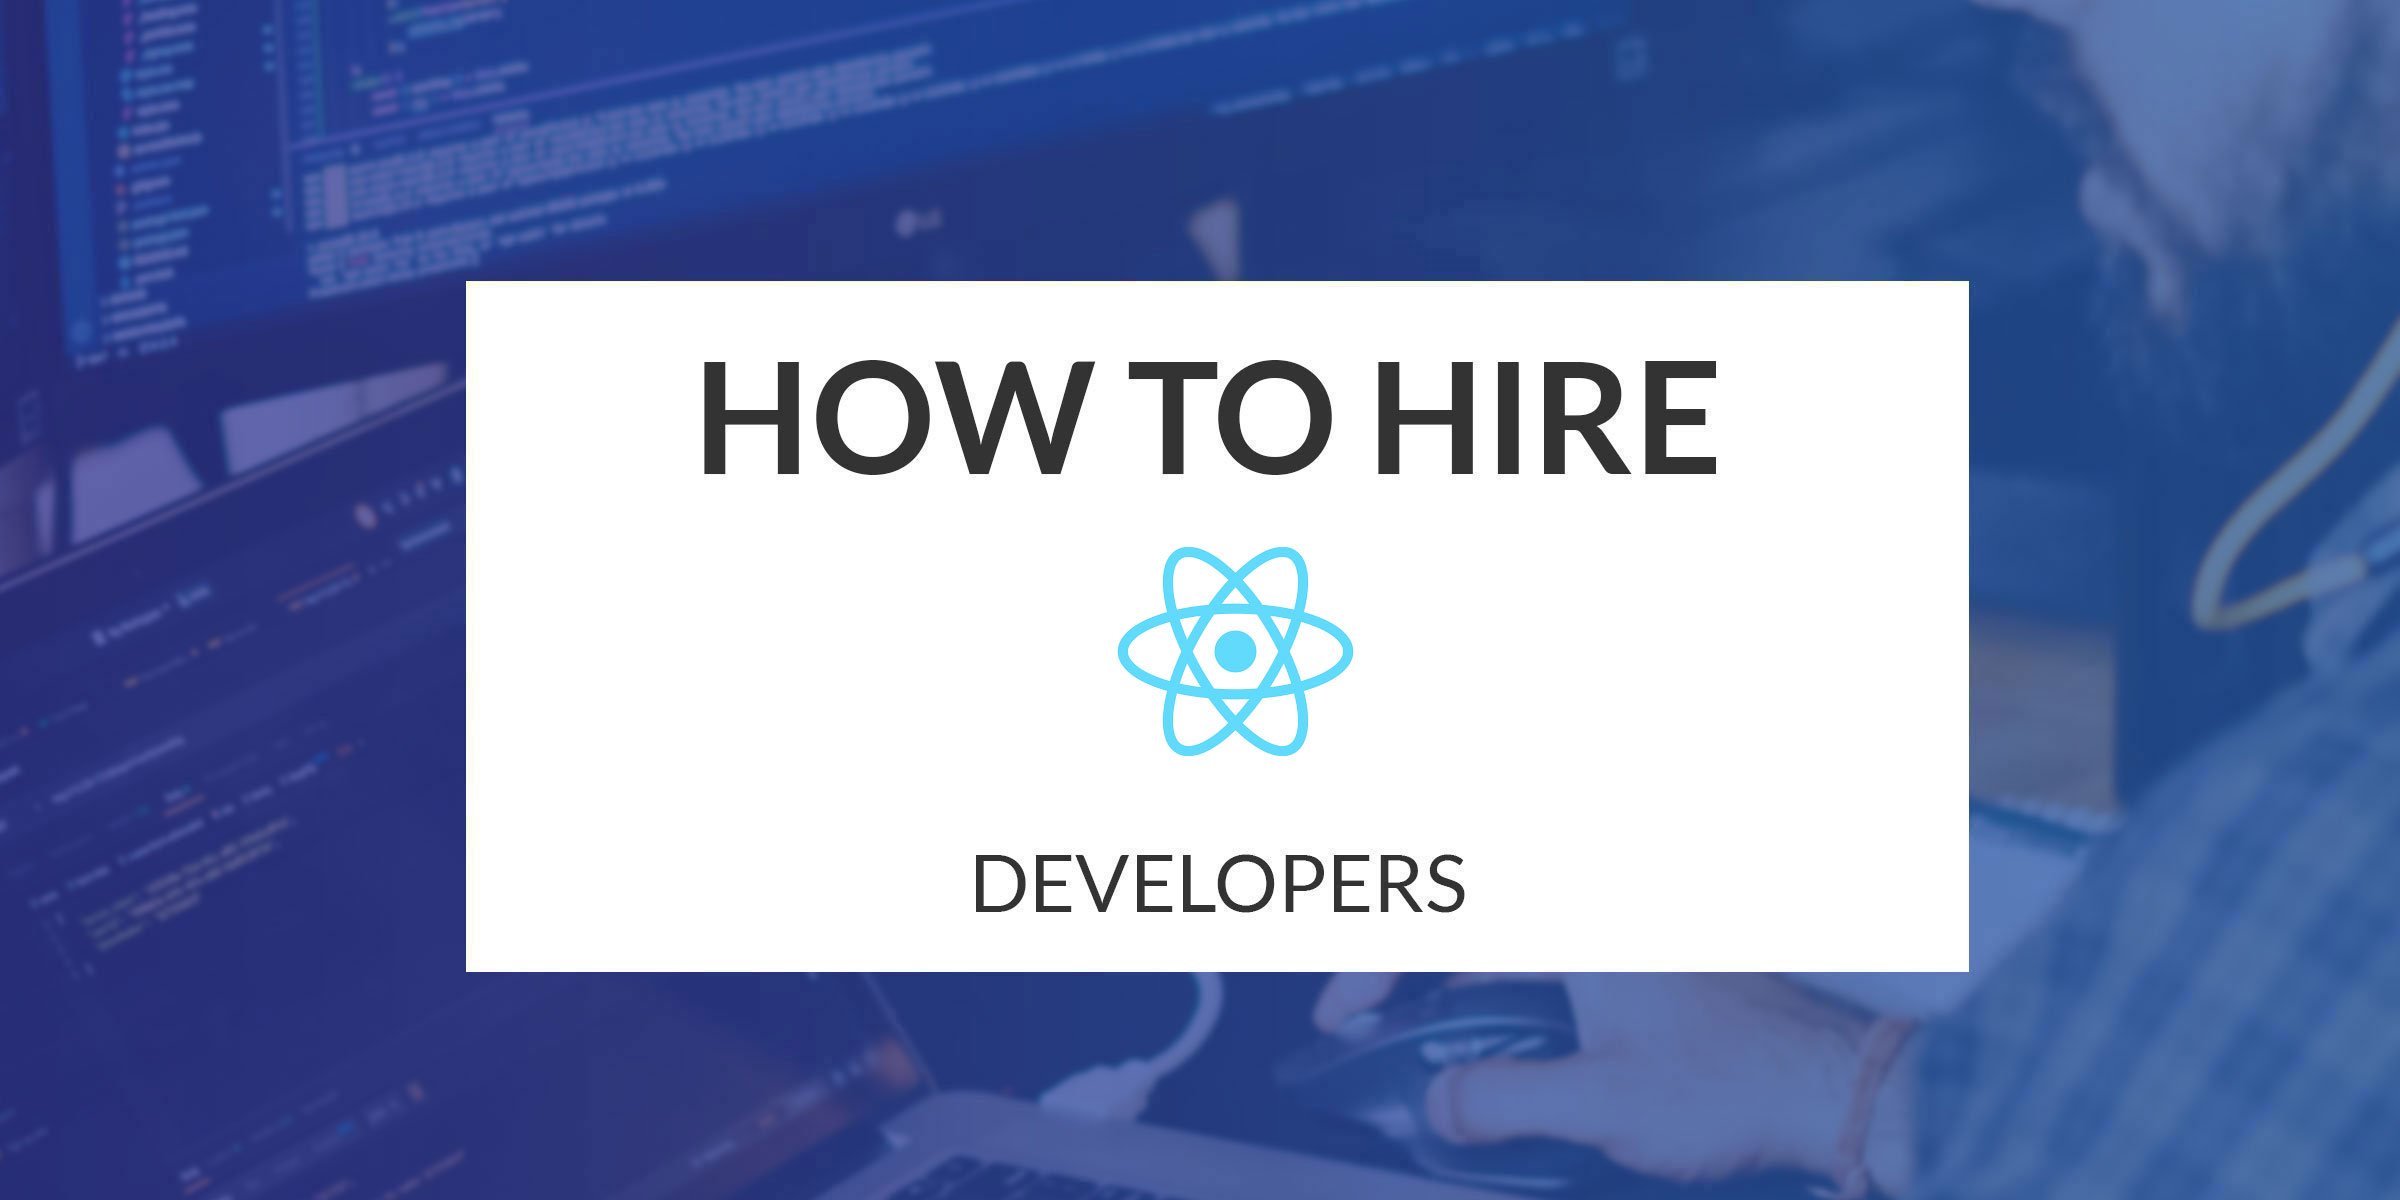 Cost to hire reactjs developer by Excellent WebWorld - issuu